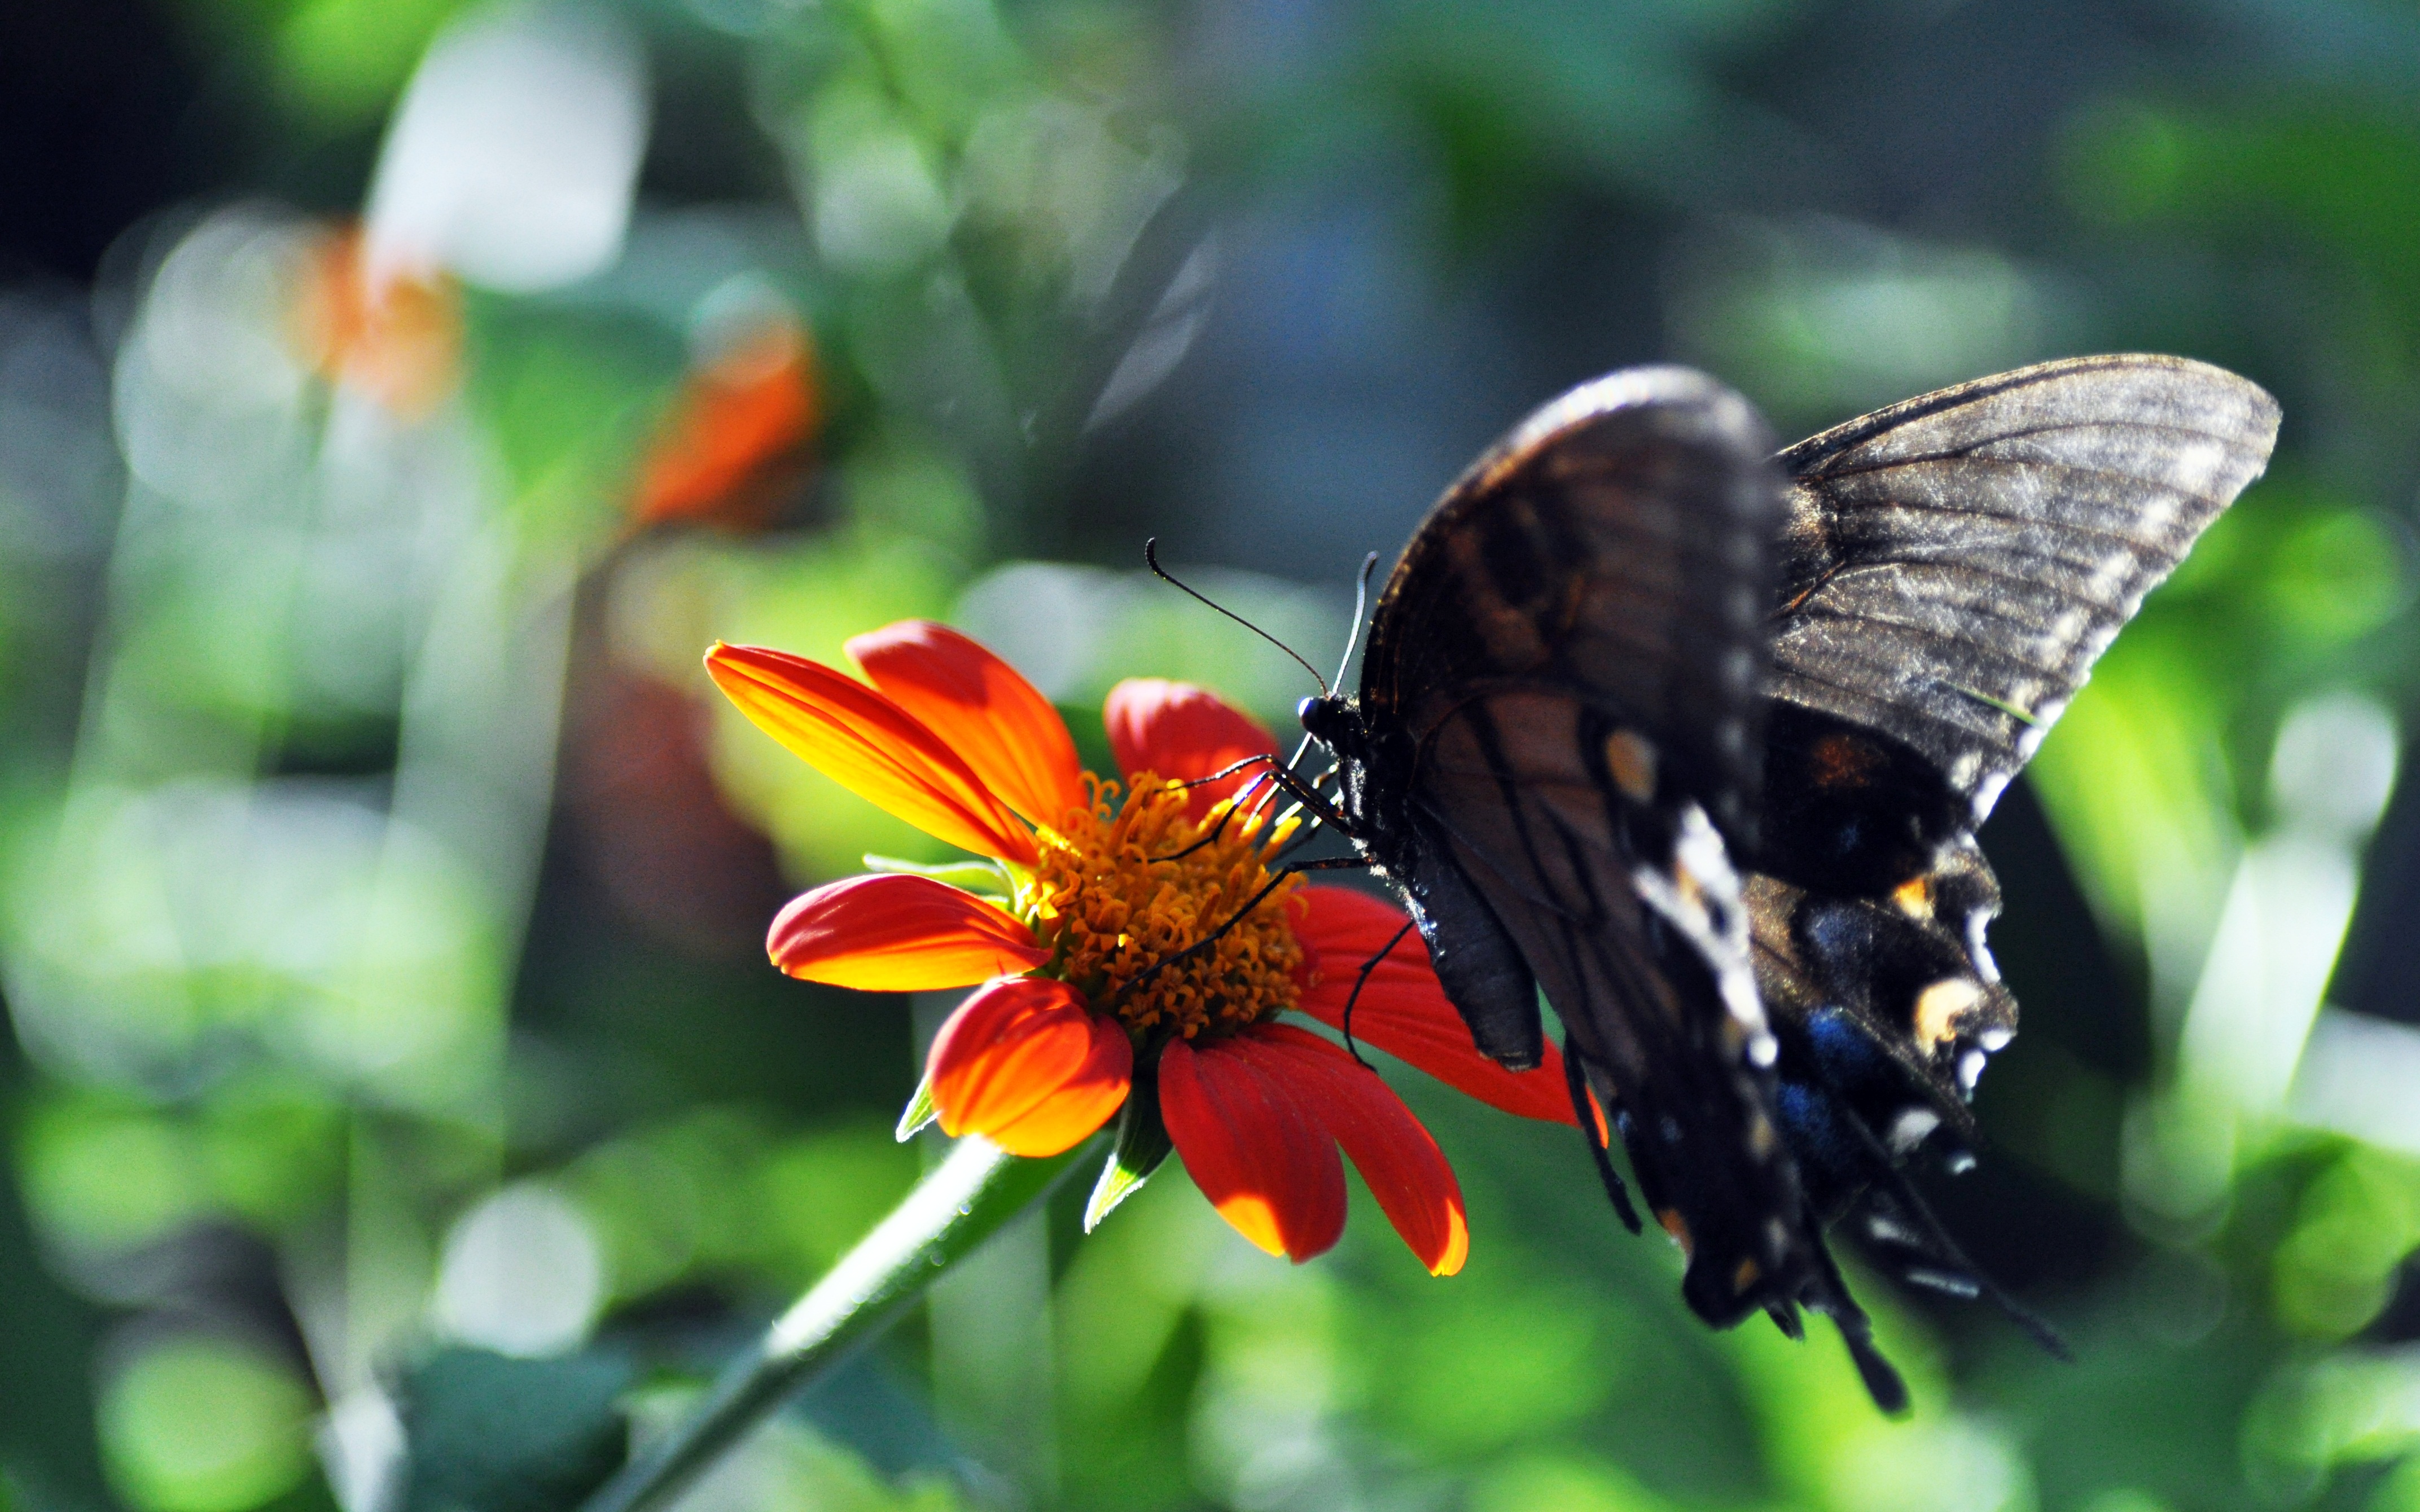 Colorful butterfly perched on a vibrant flower in a summery setting